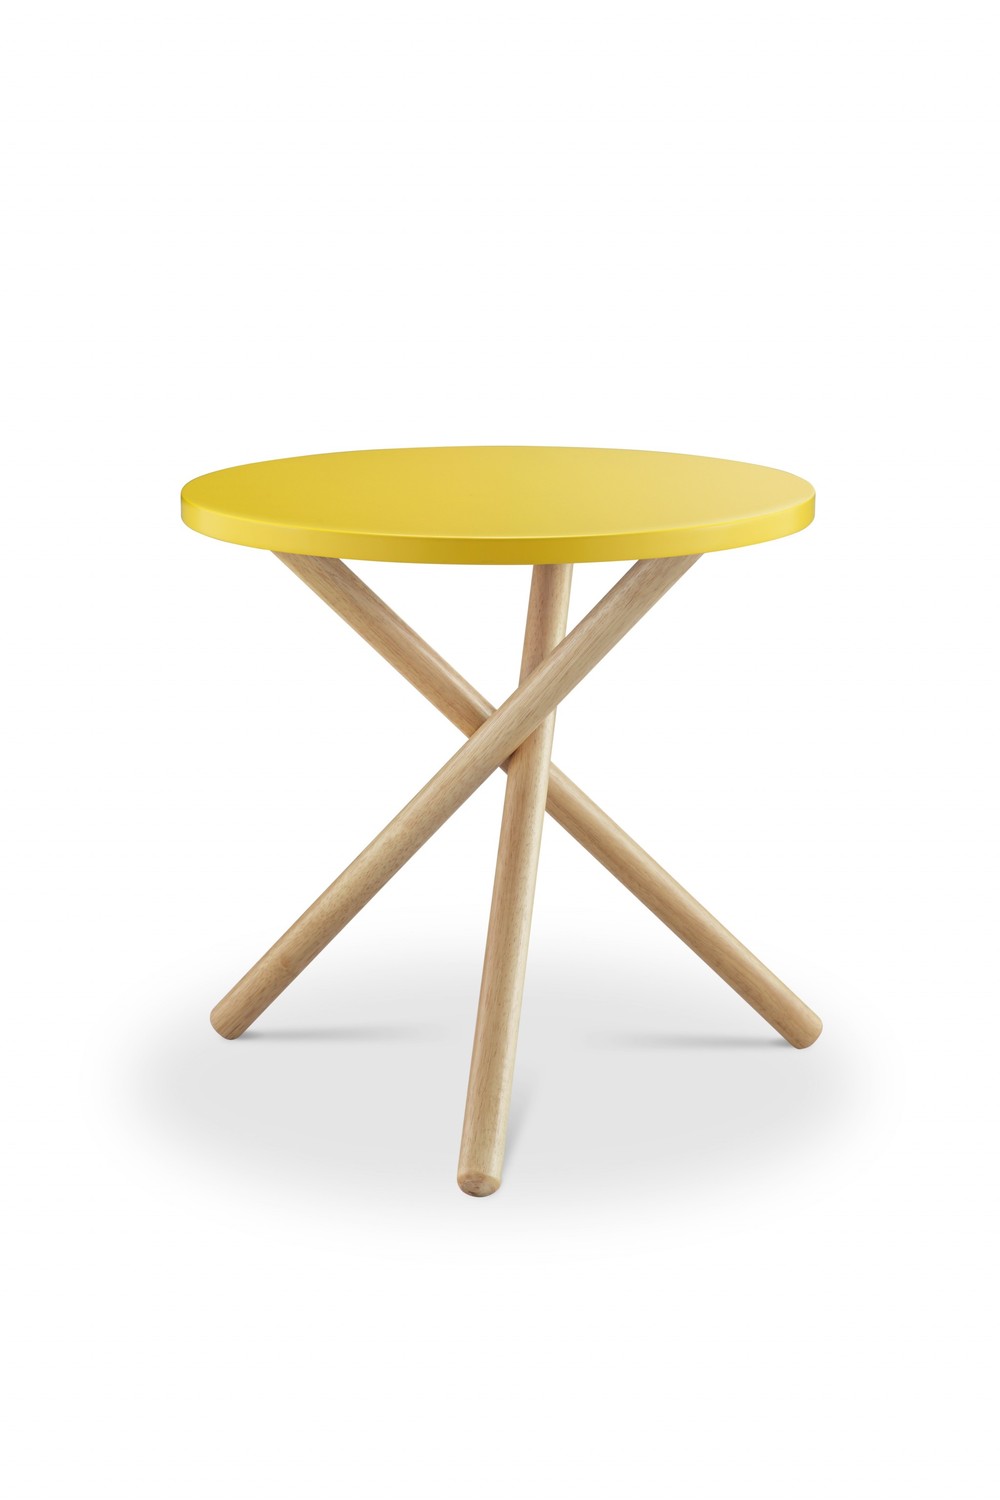 Mod Round Yellow and Light Wood Side Table